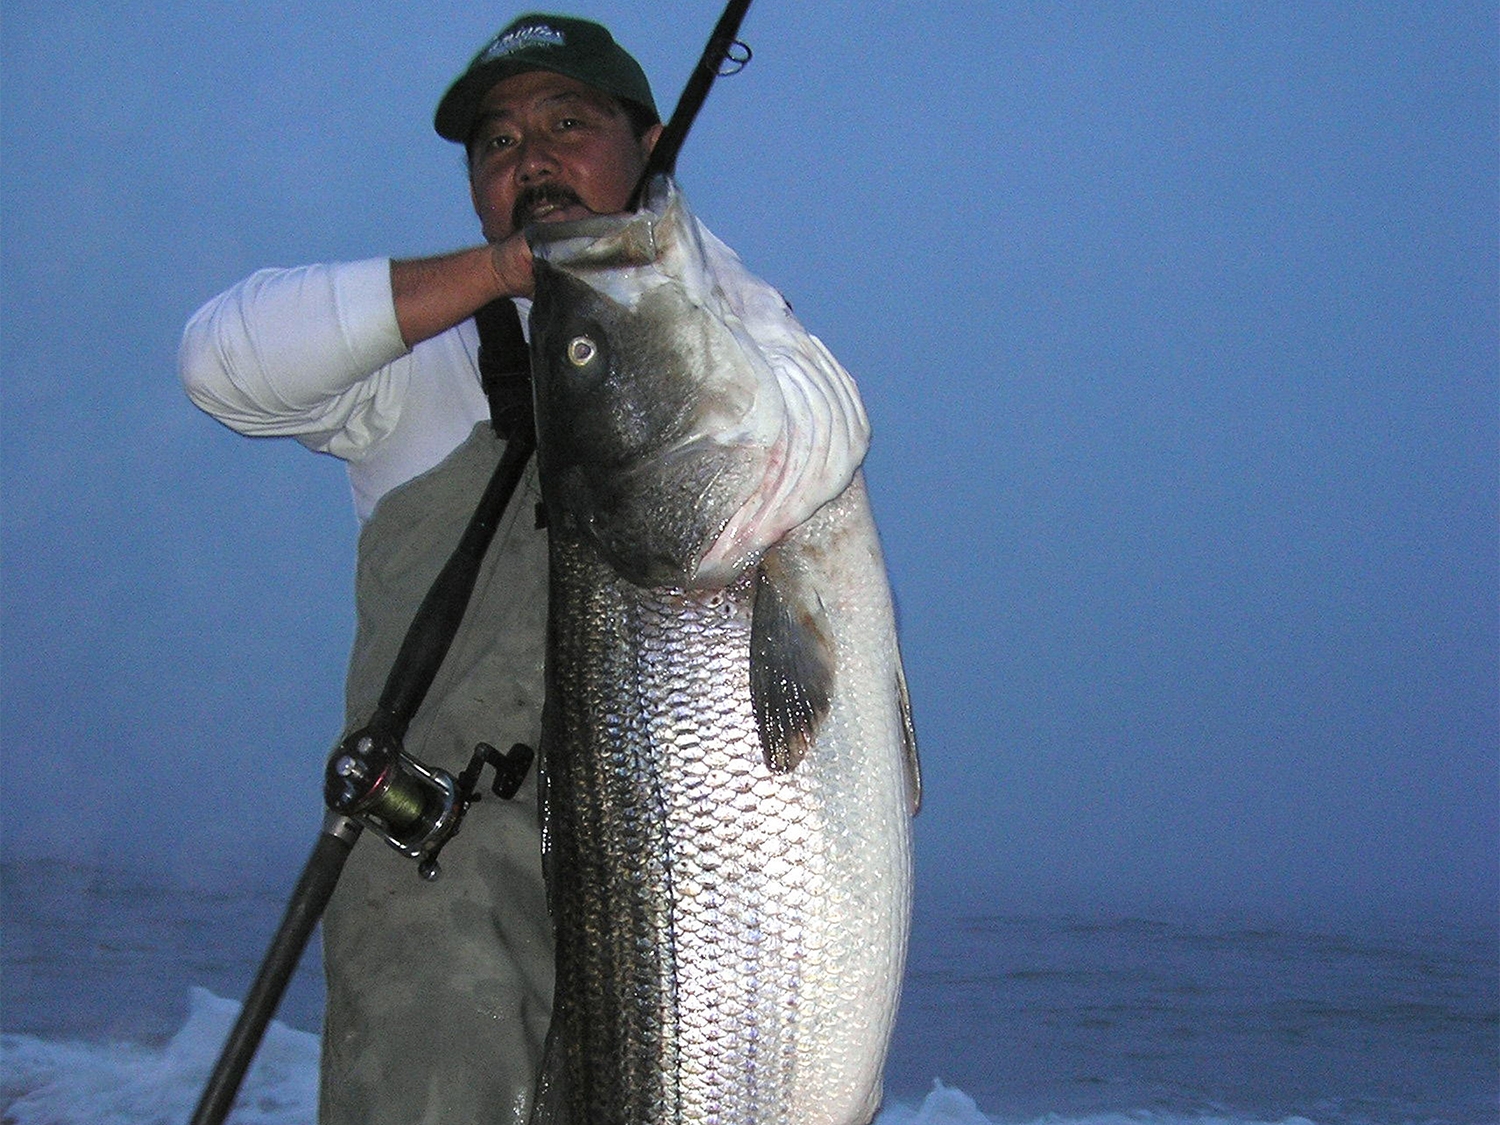 Fishing Report: Some tips for catching striped bass